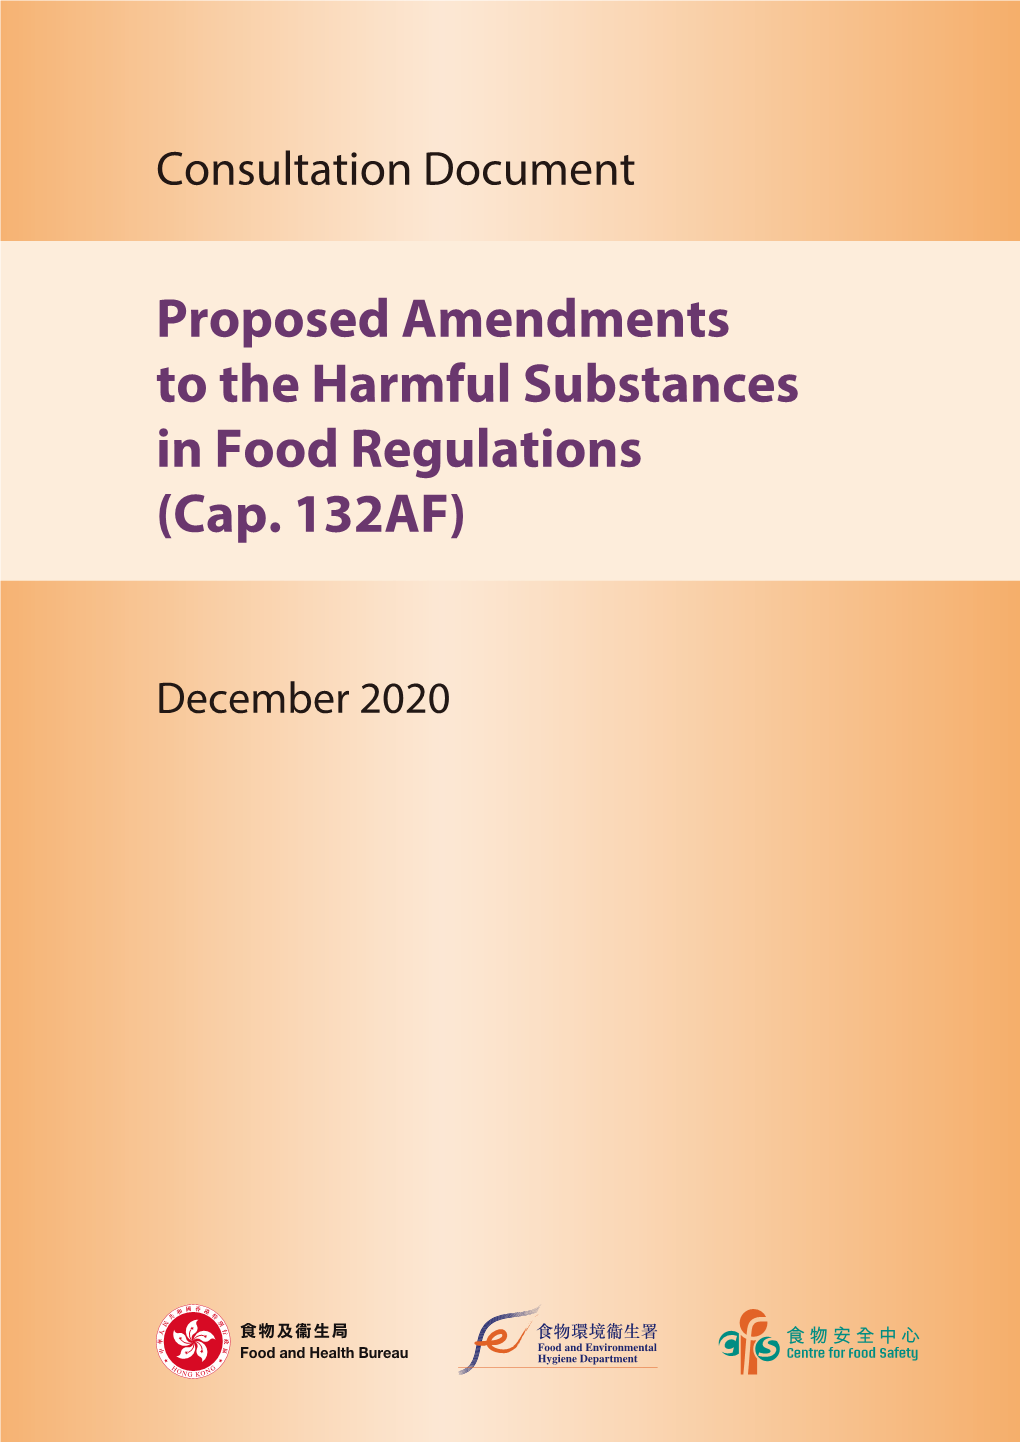 Proposed Amendments to the Harmful Substances in Food Regulations (Cap